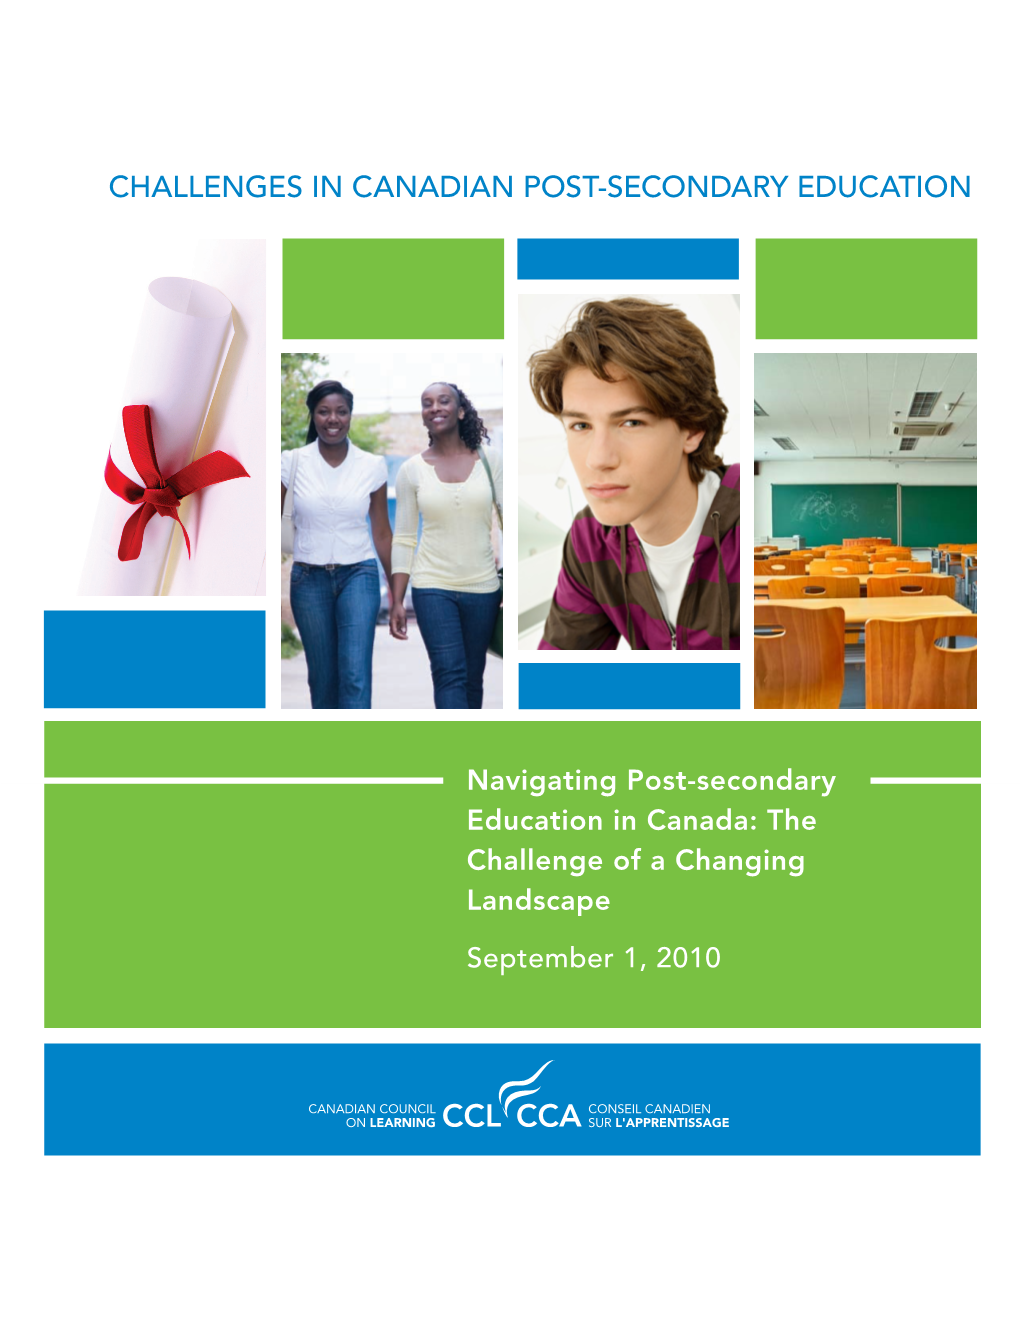 Challenges in Canadian Post-Secondary Education